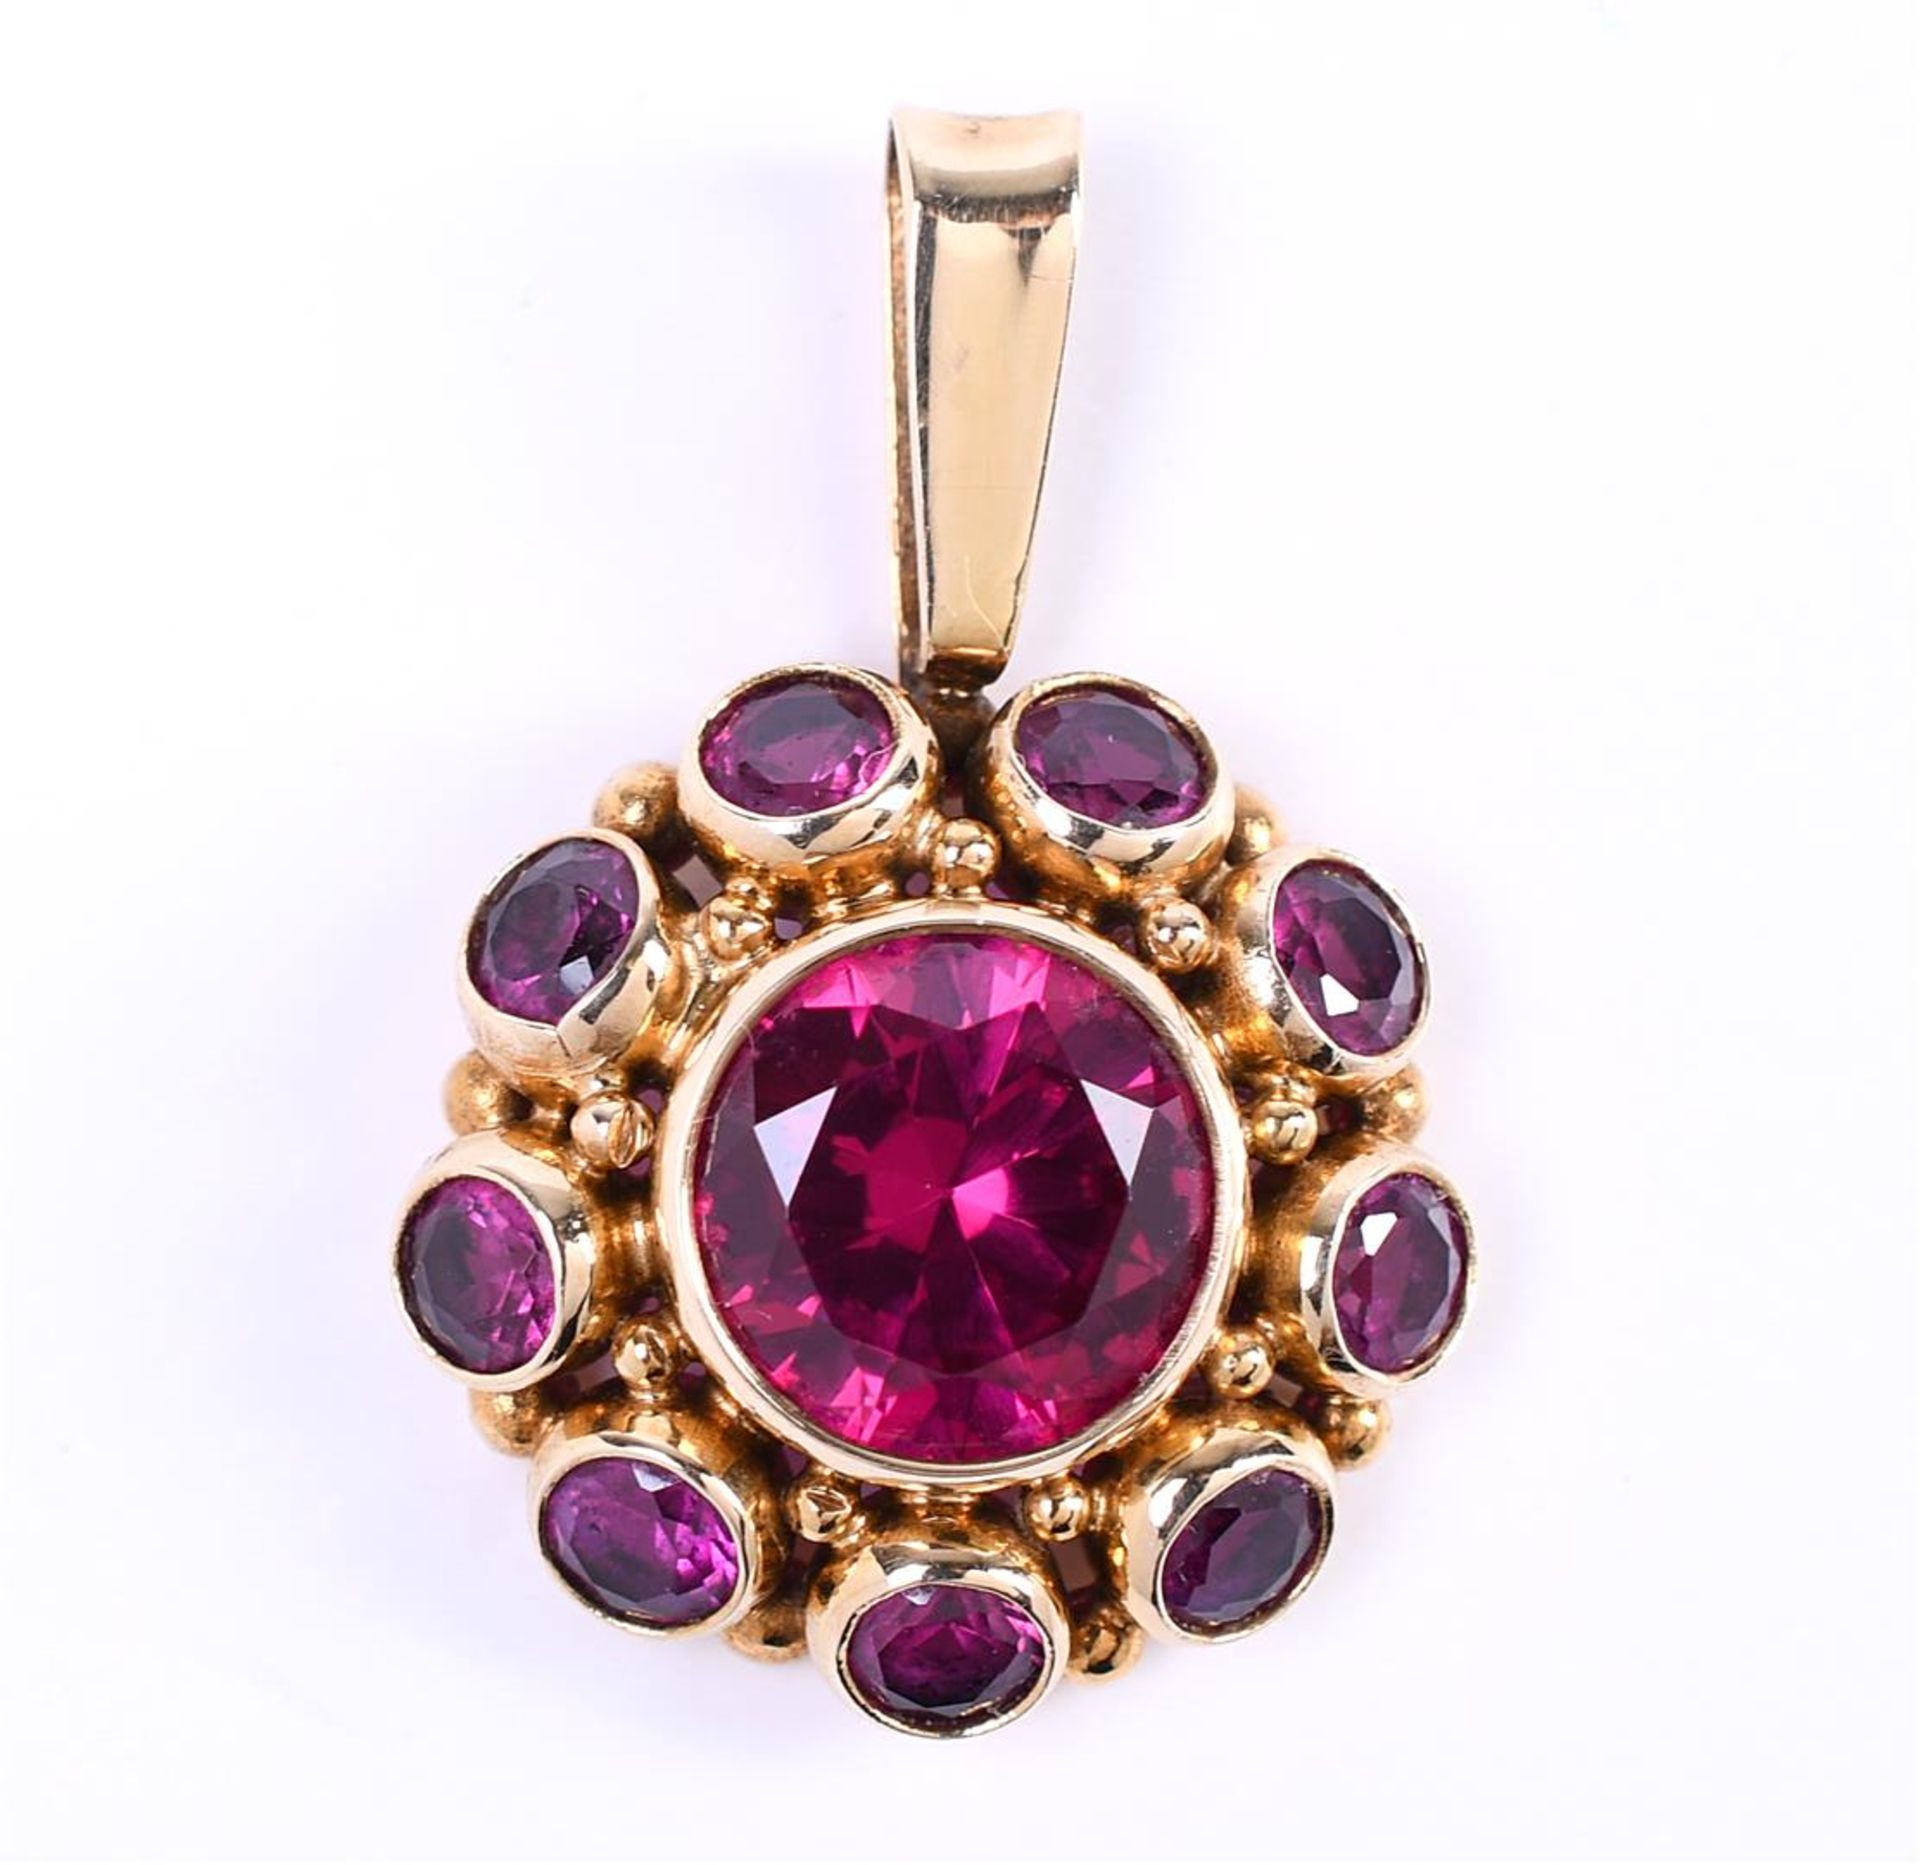 14 carat yellow gold ladies rosette pendant, set with 1 x synthetic ruby of approx. 7.5 mm